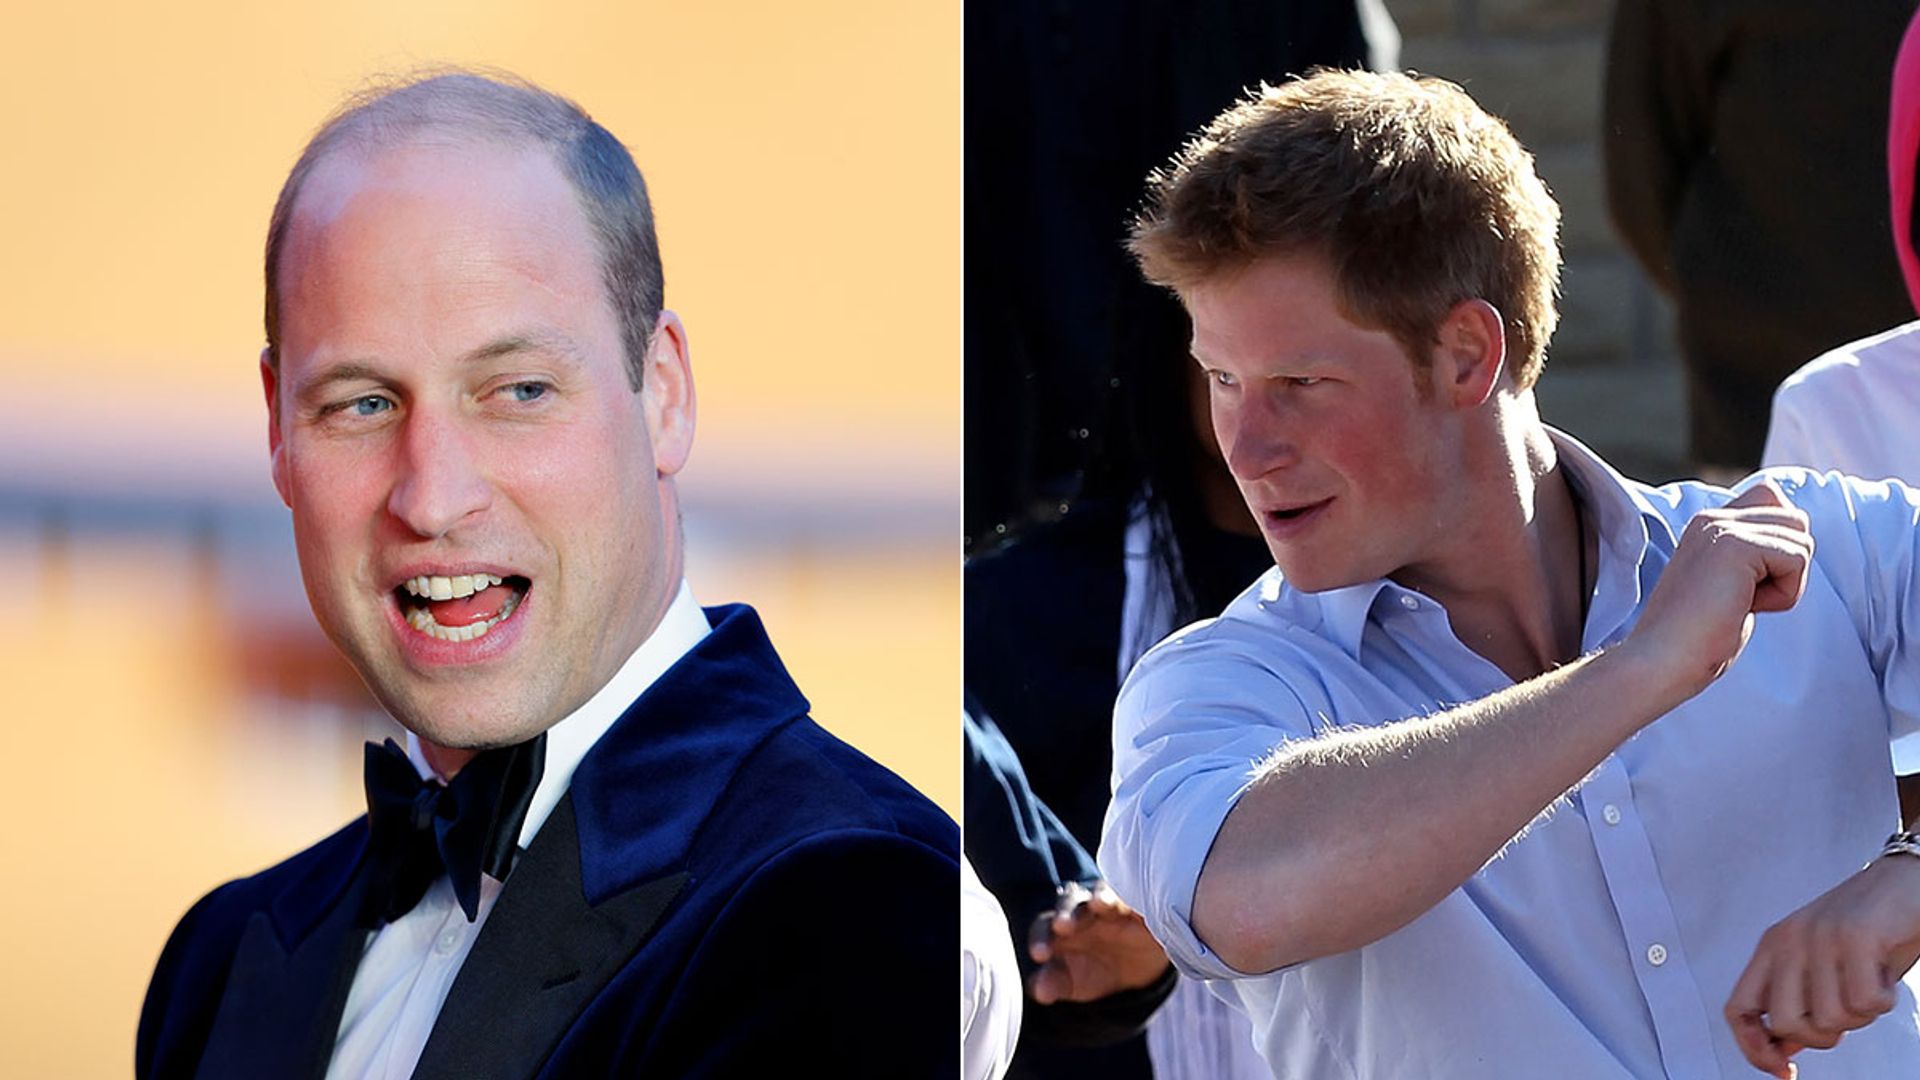 Party princes letting their hair down: Prince Harry, Prince William, Prince Albert & more